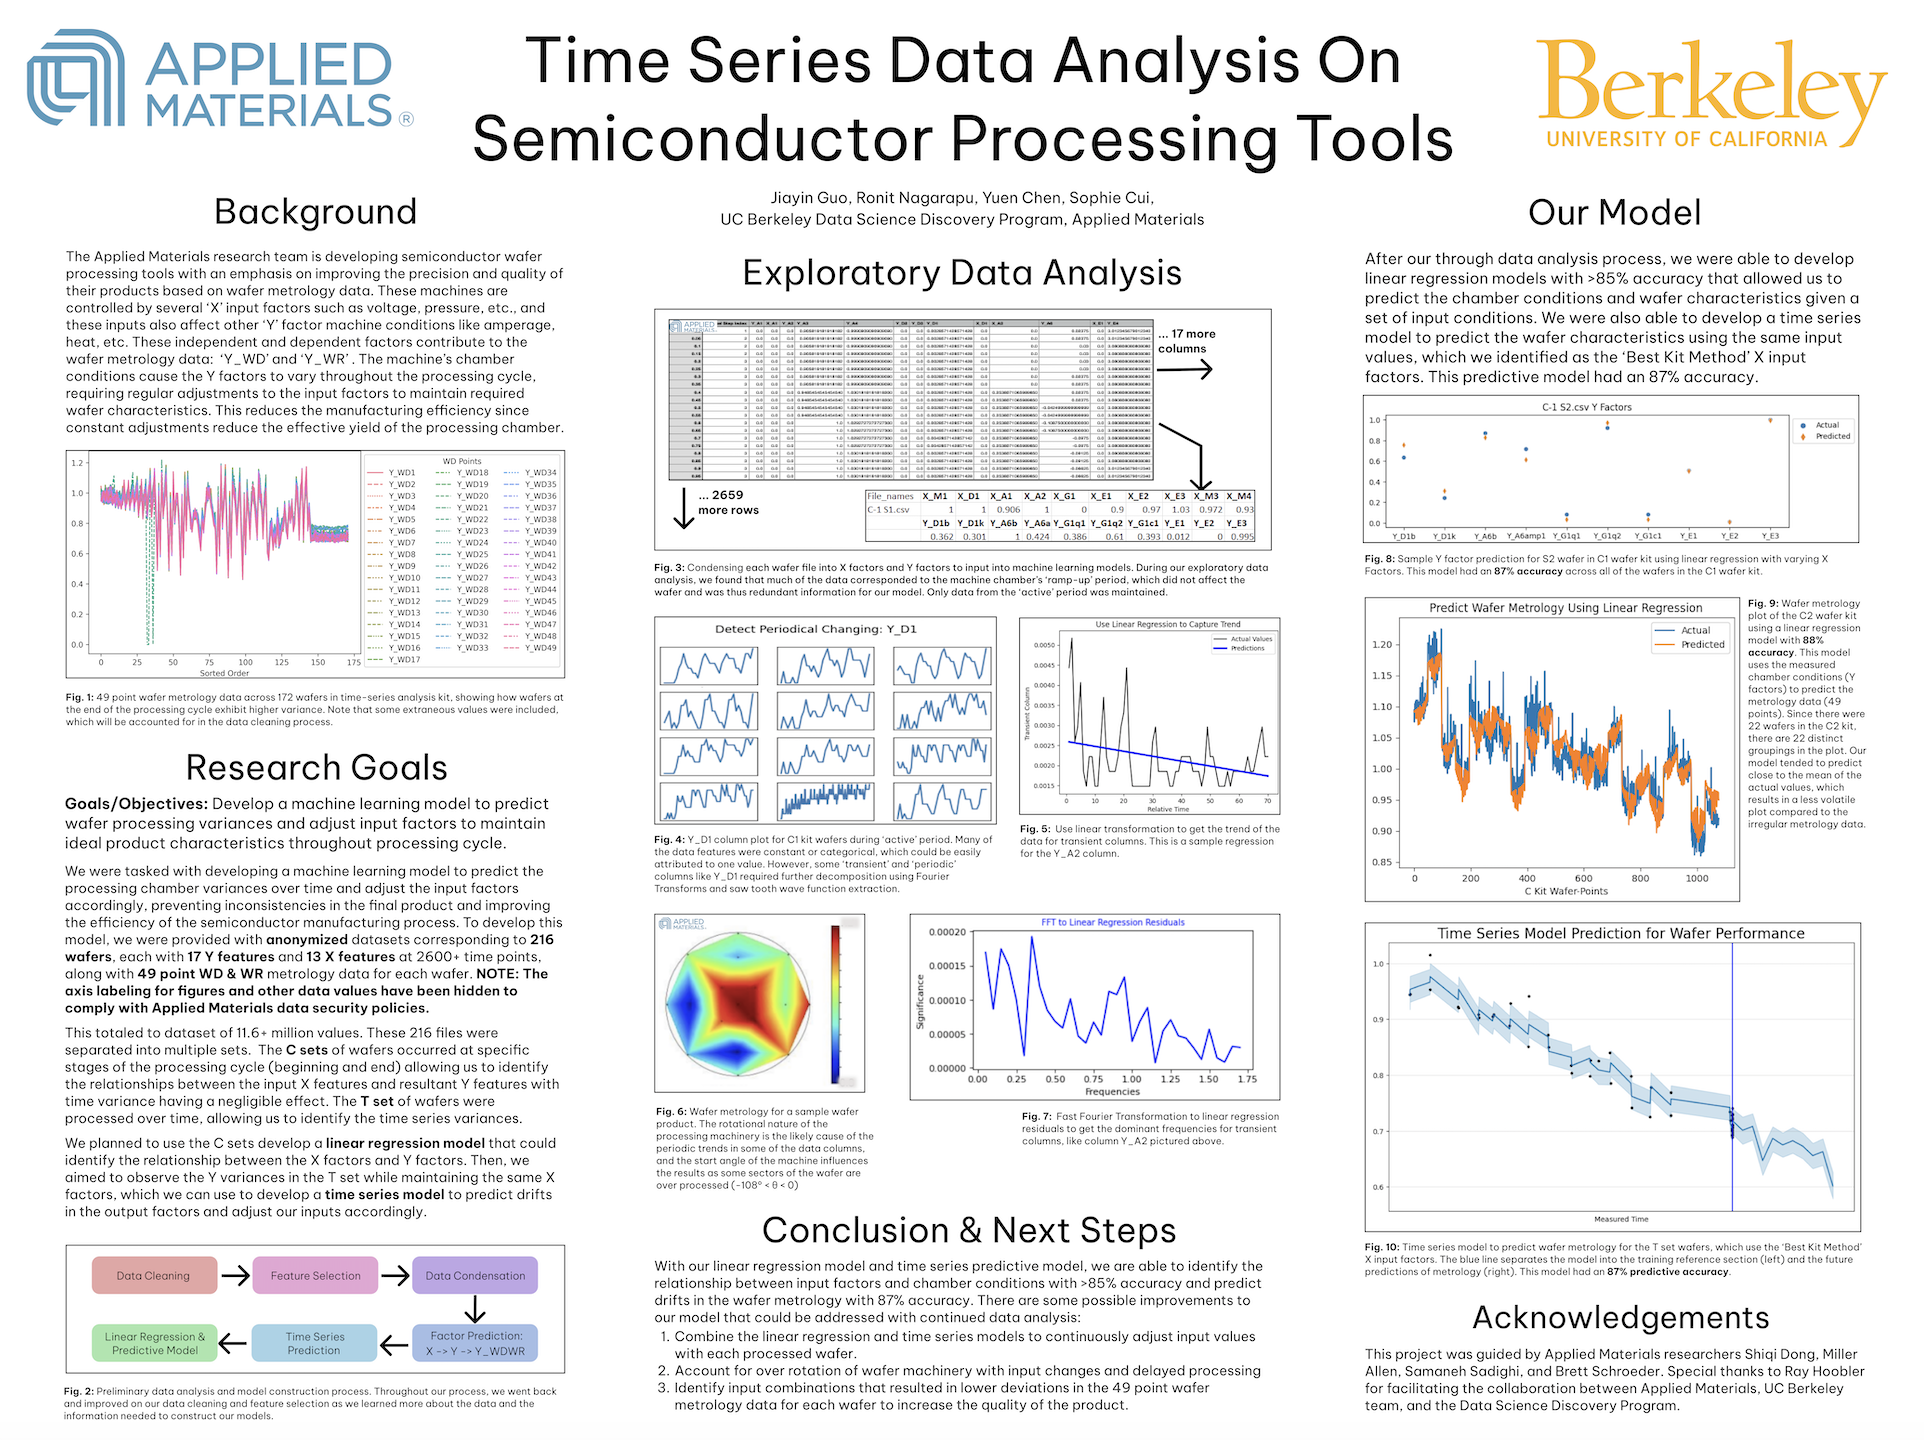 Applied Materials: Advanced Methods of Time Series Data Analysis - Fall 2022 Discovery Project